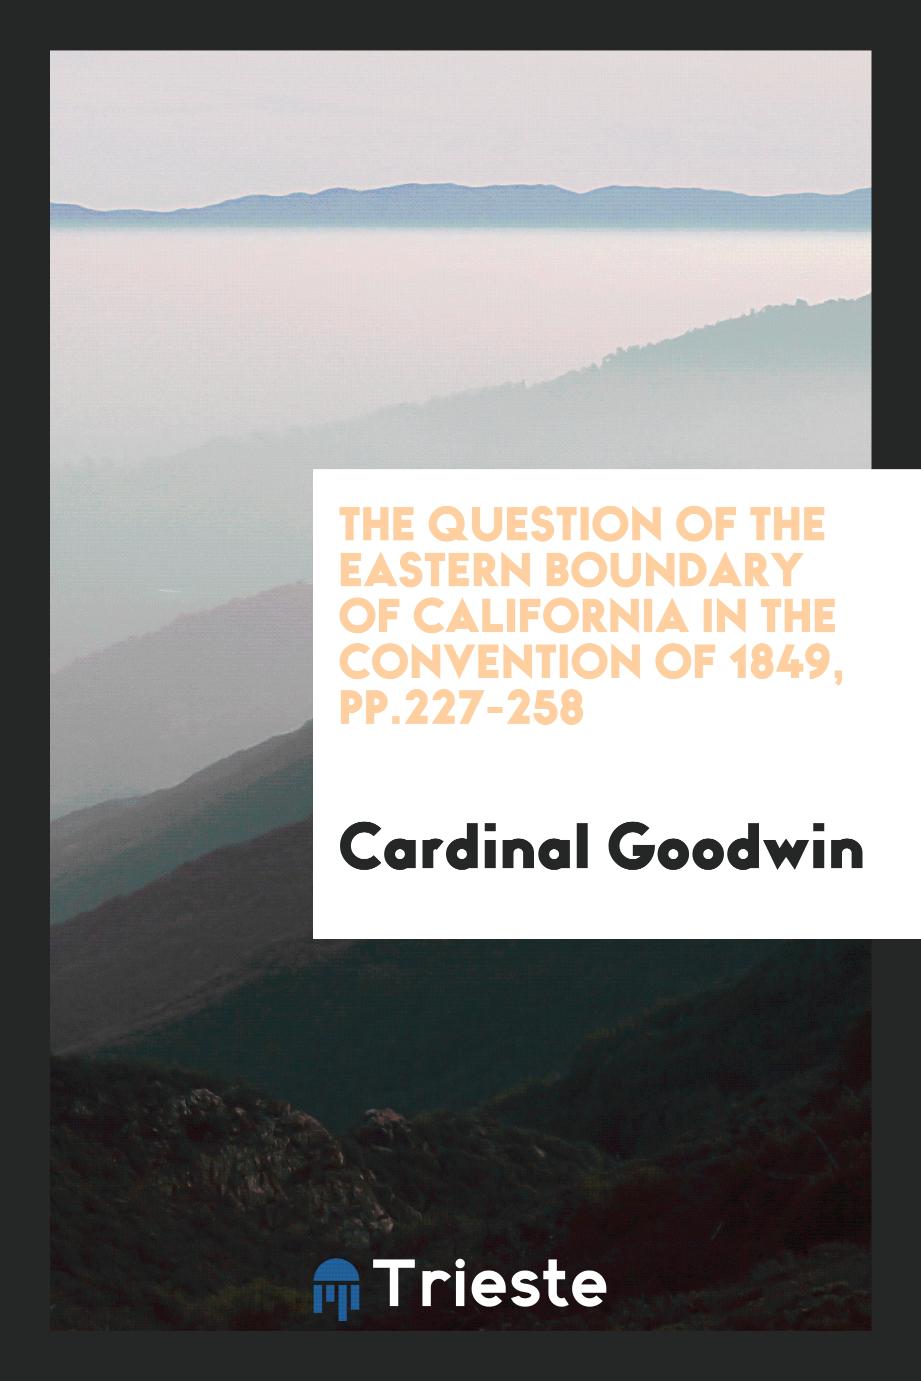 The question of the eastern boundary of California in the convention of 1849, pp.227-258